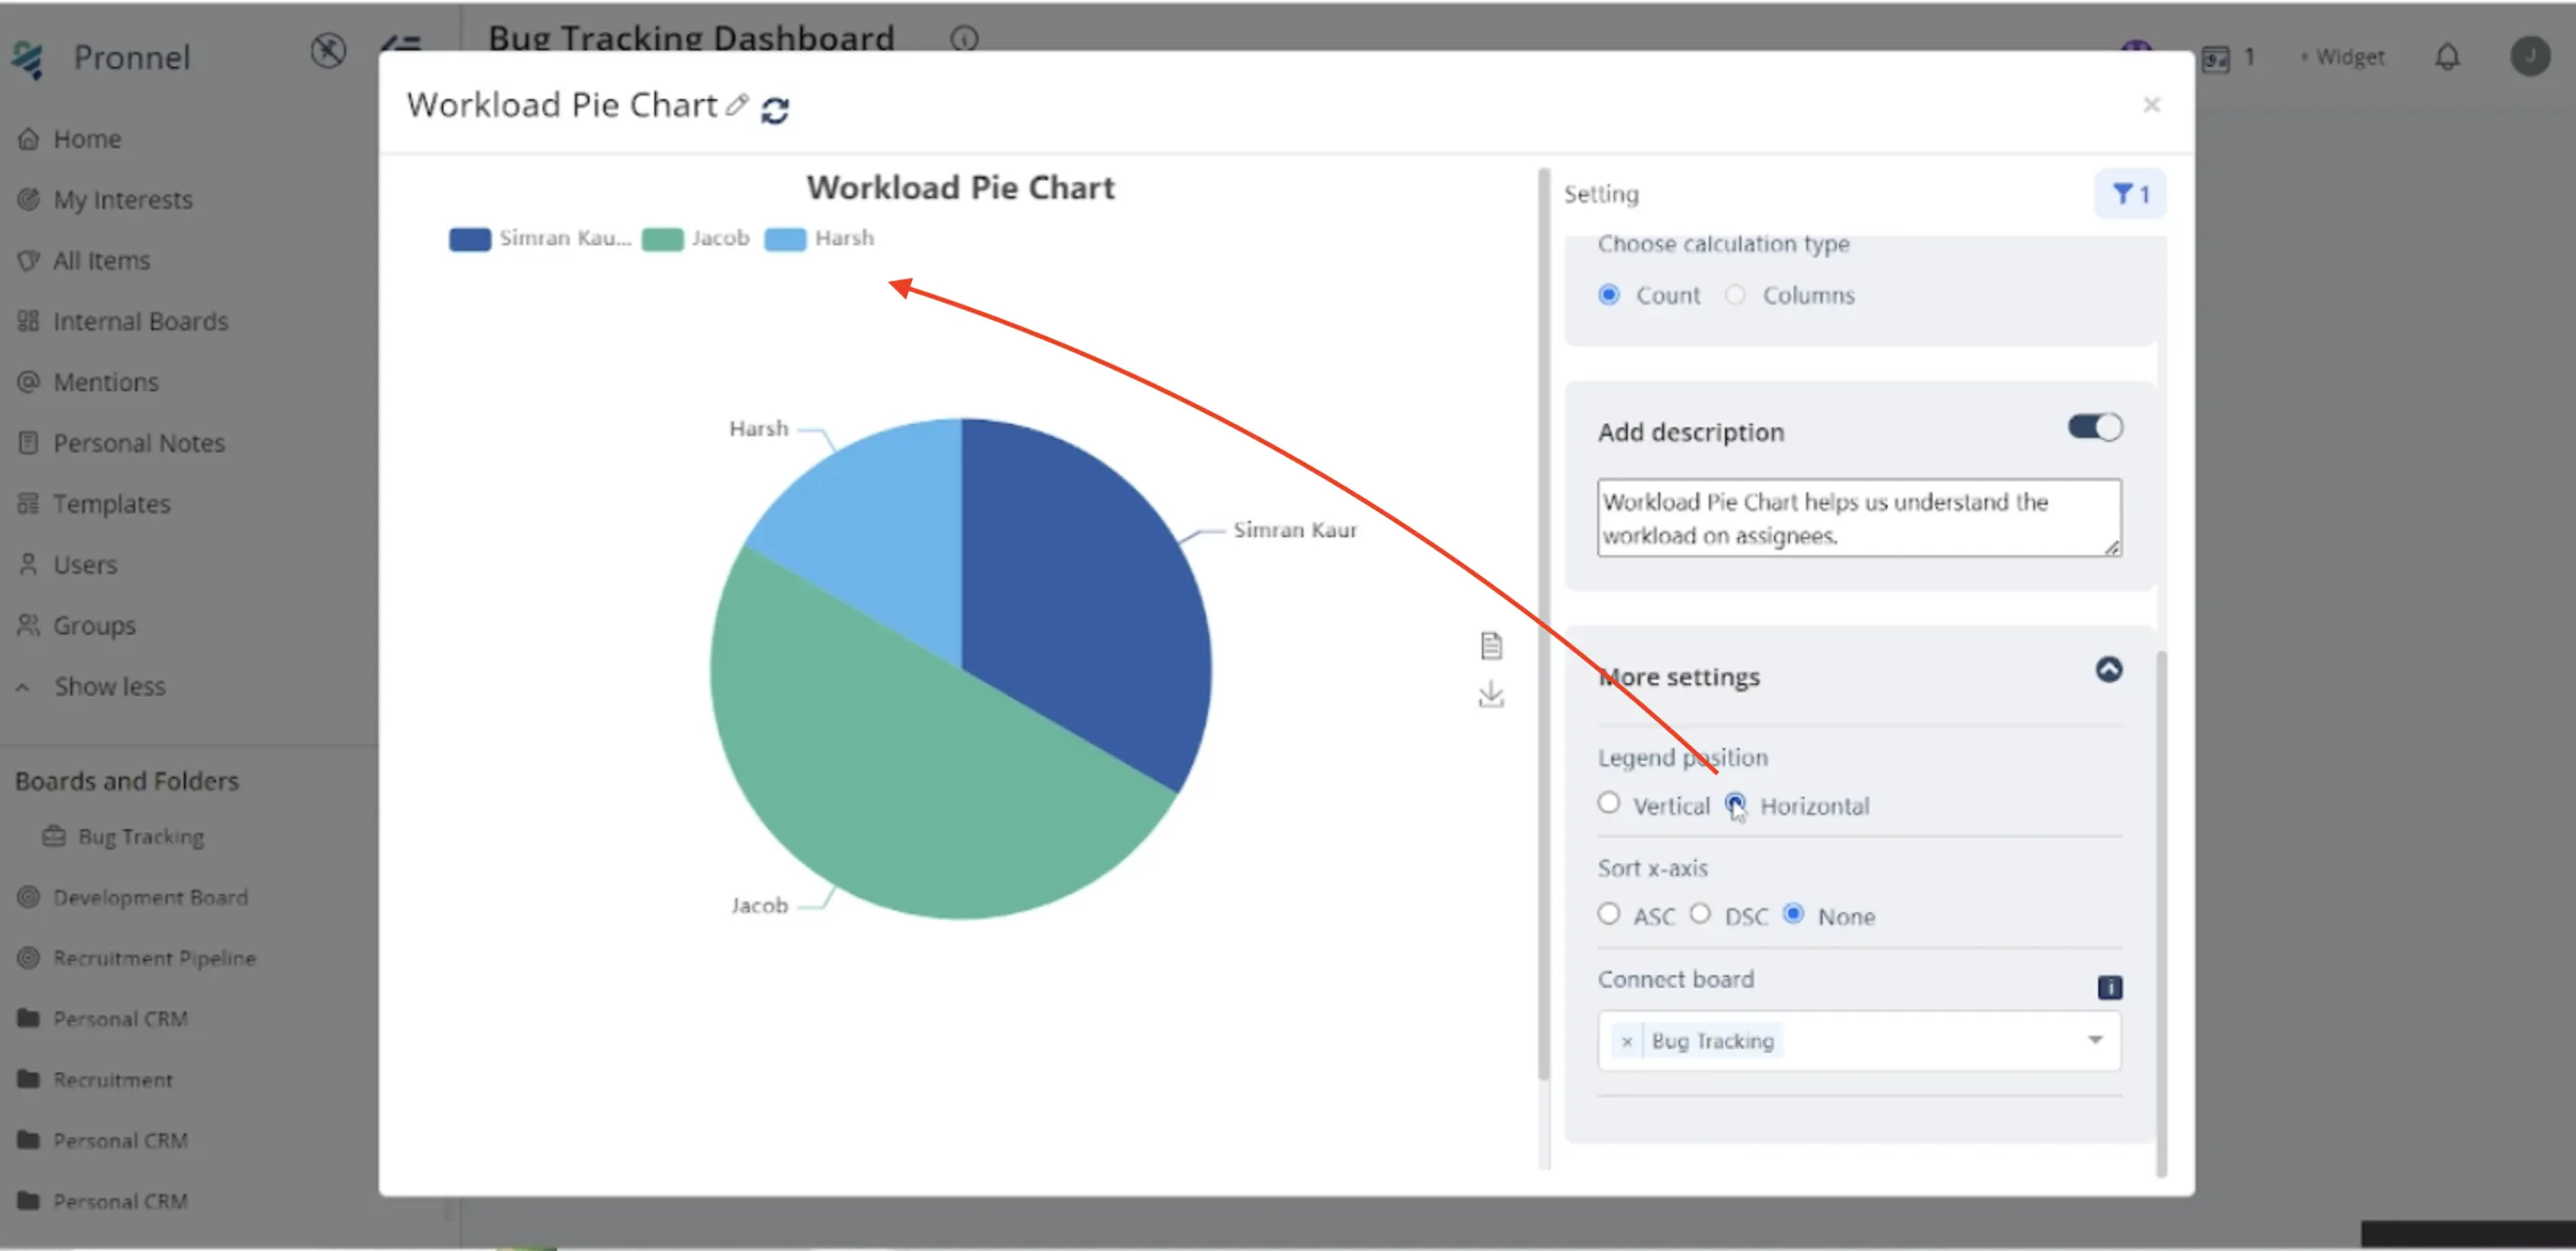 adjust the legend's position, sort the data, or specify the boards from which you want to draw data for the Pie Chart.